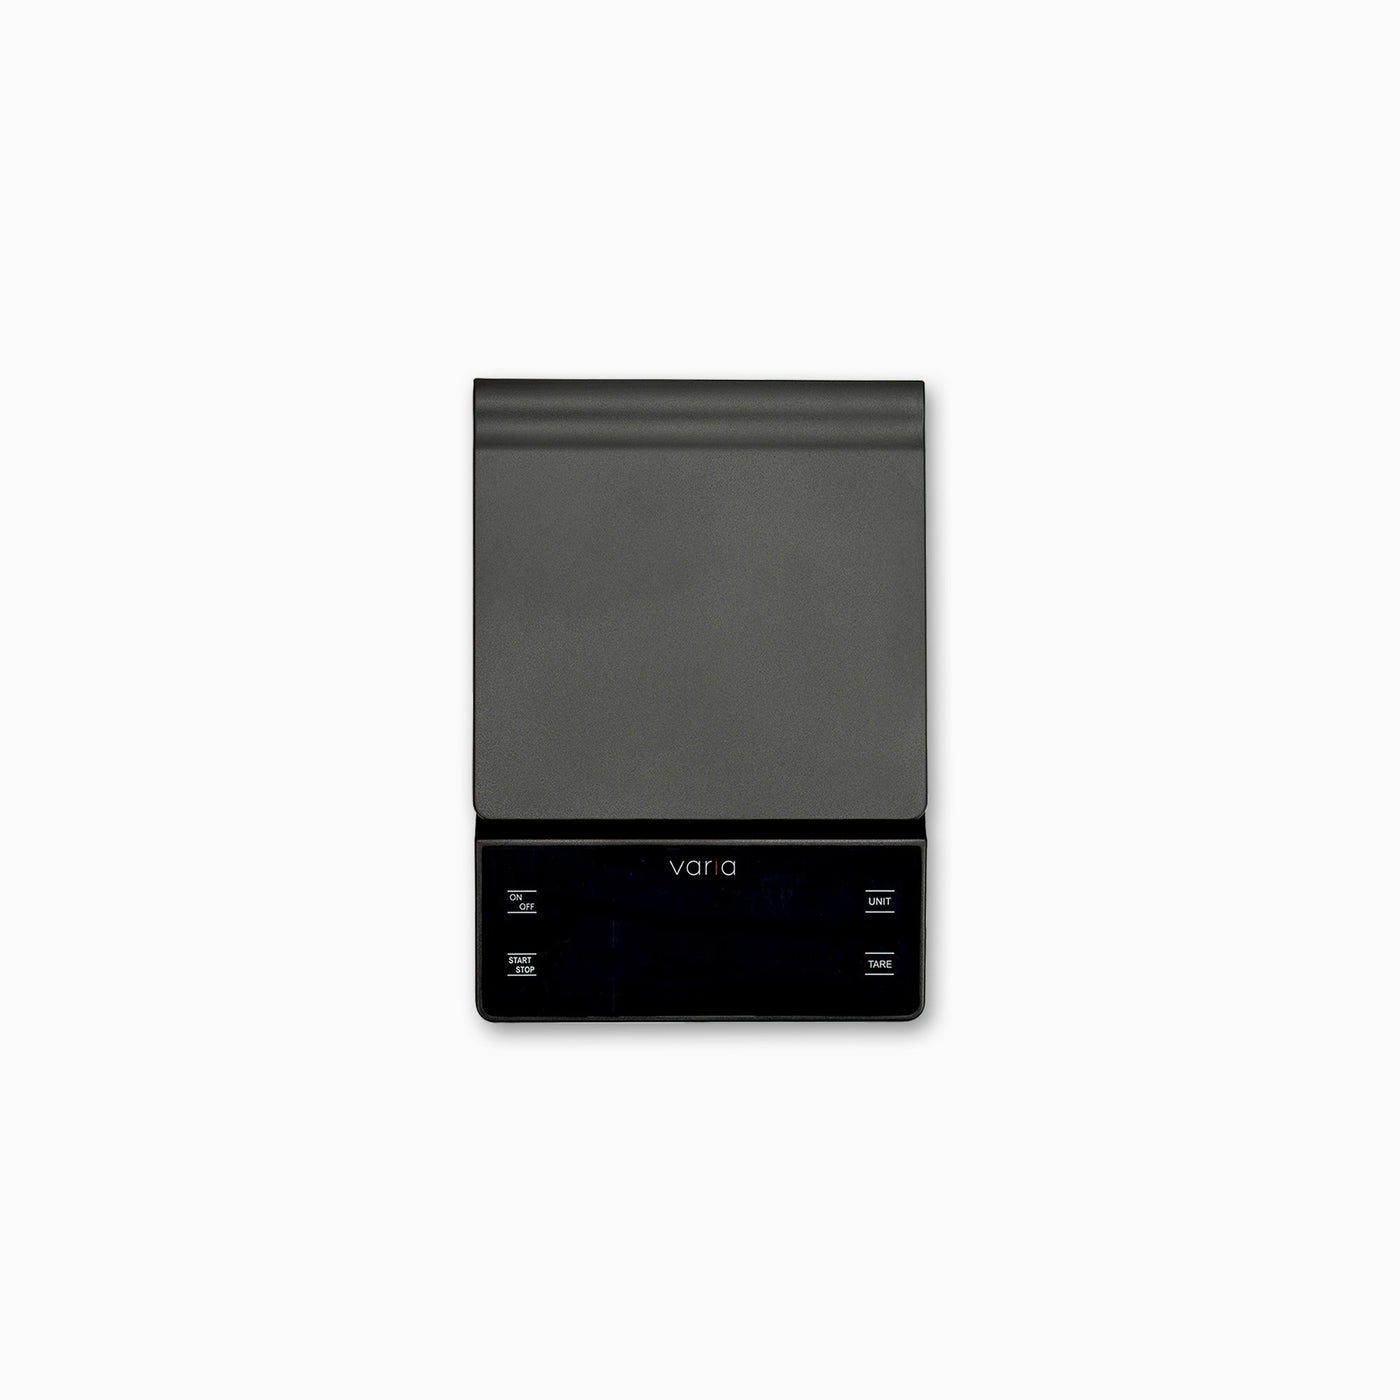 Varia Digital LED Scale With Timer